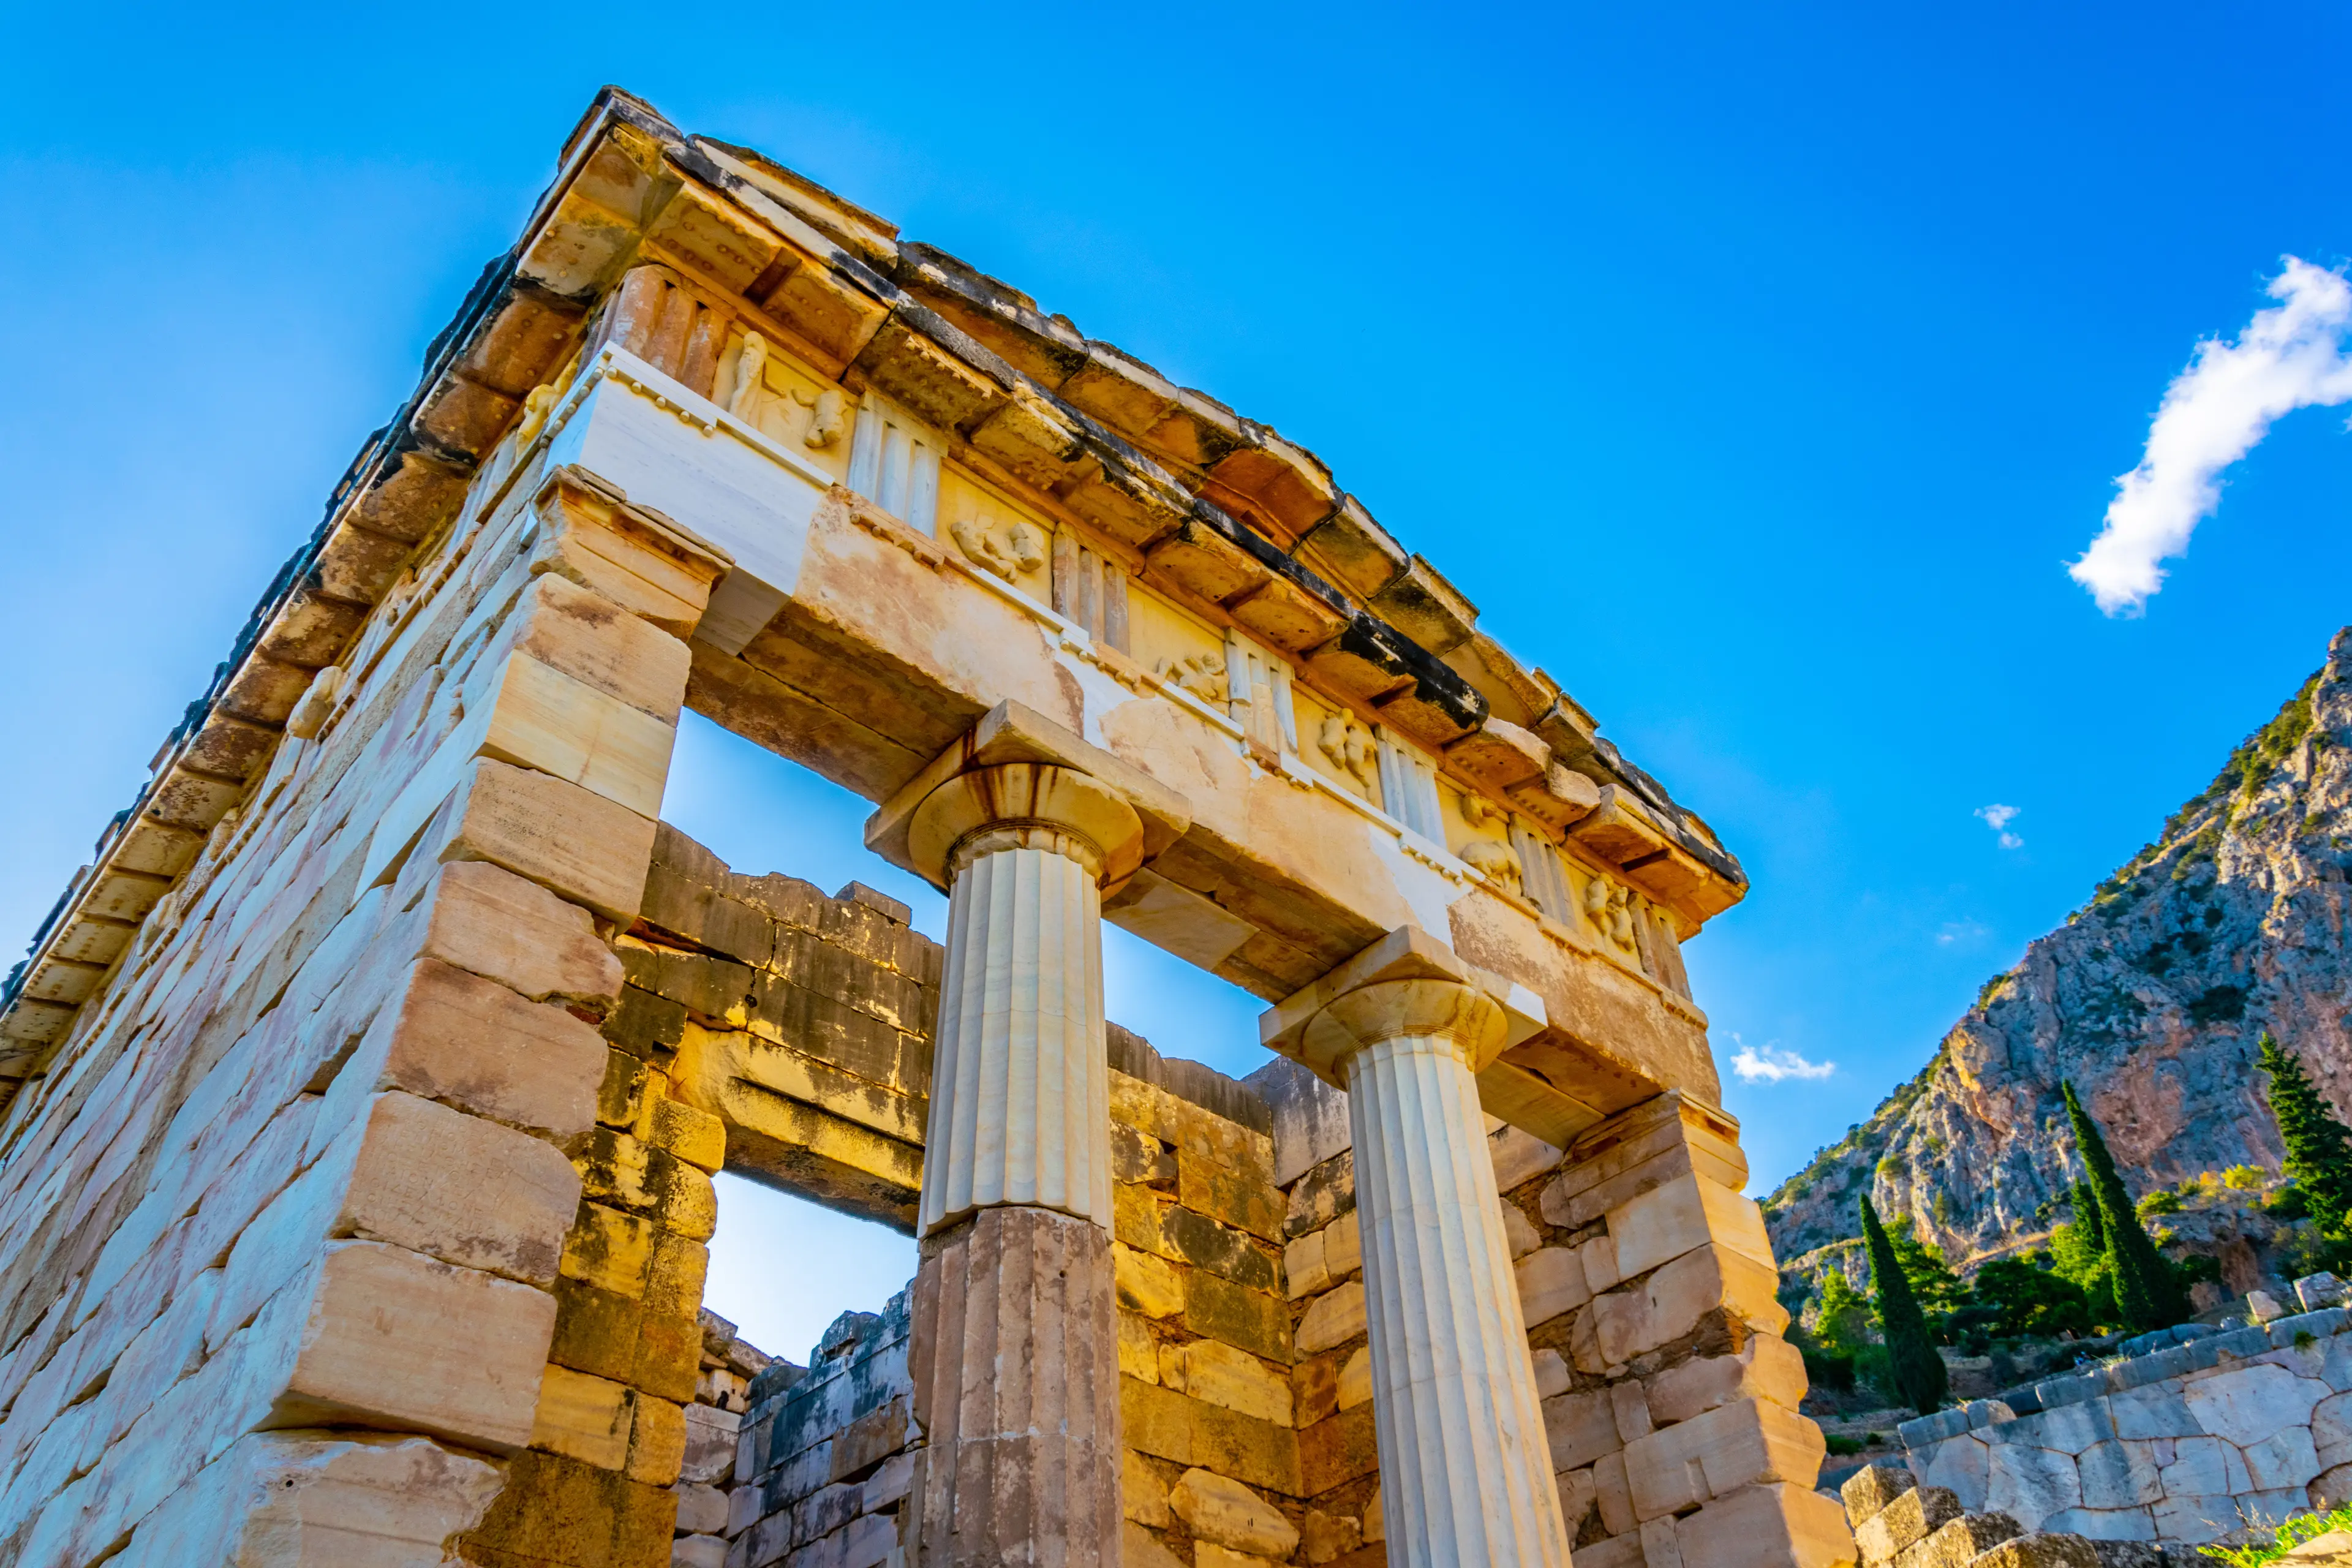 Unwind in Delphi: A One-Day Unique Getaway with Friends